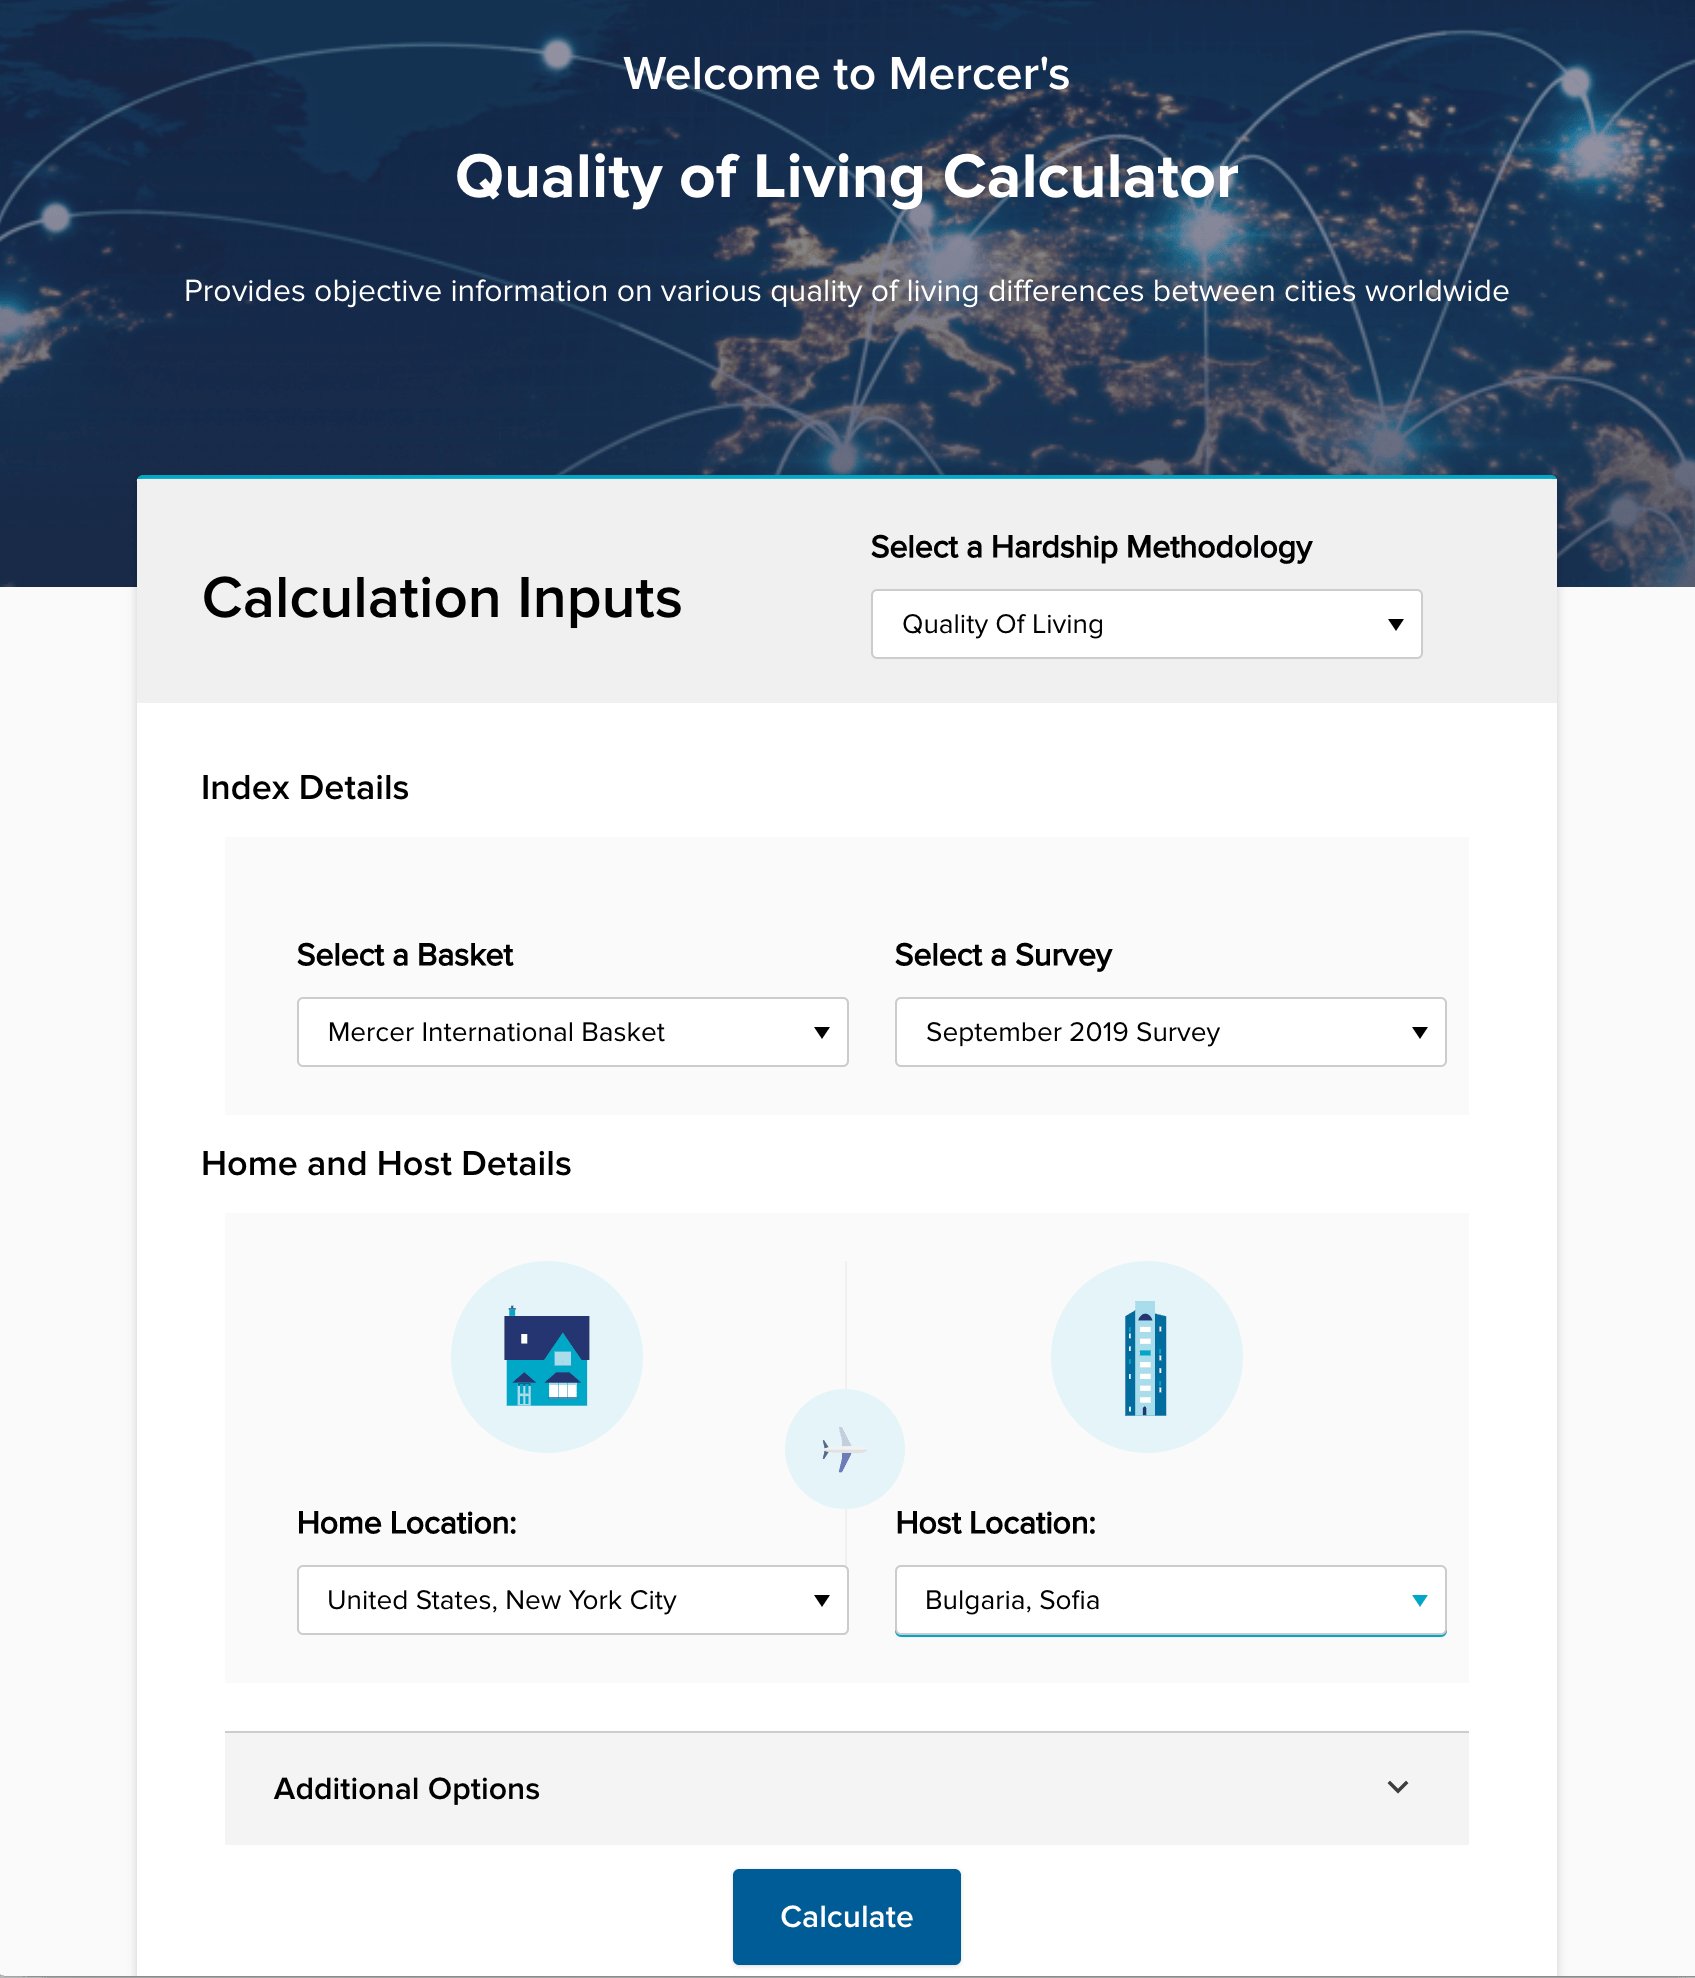 Quality of Living Calculator - Welcome screen